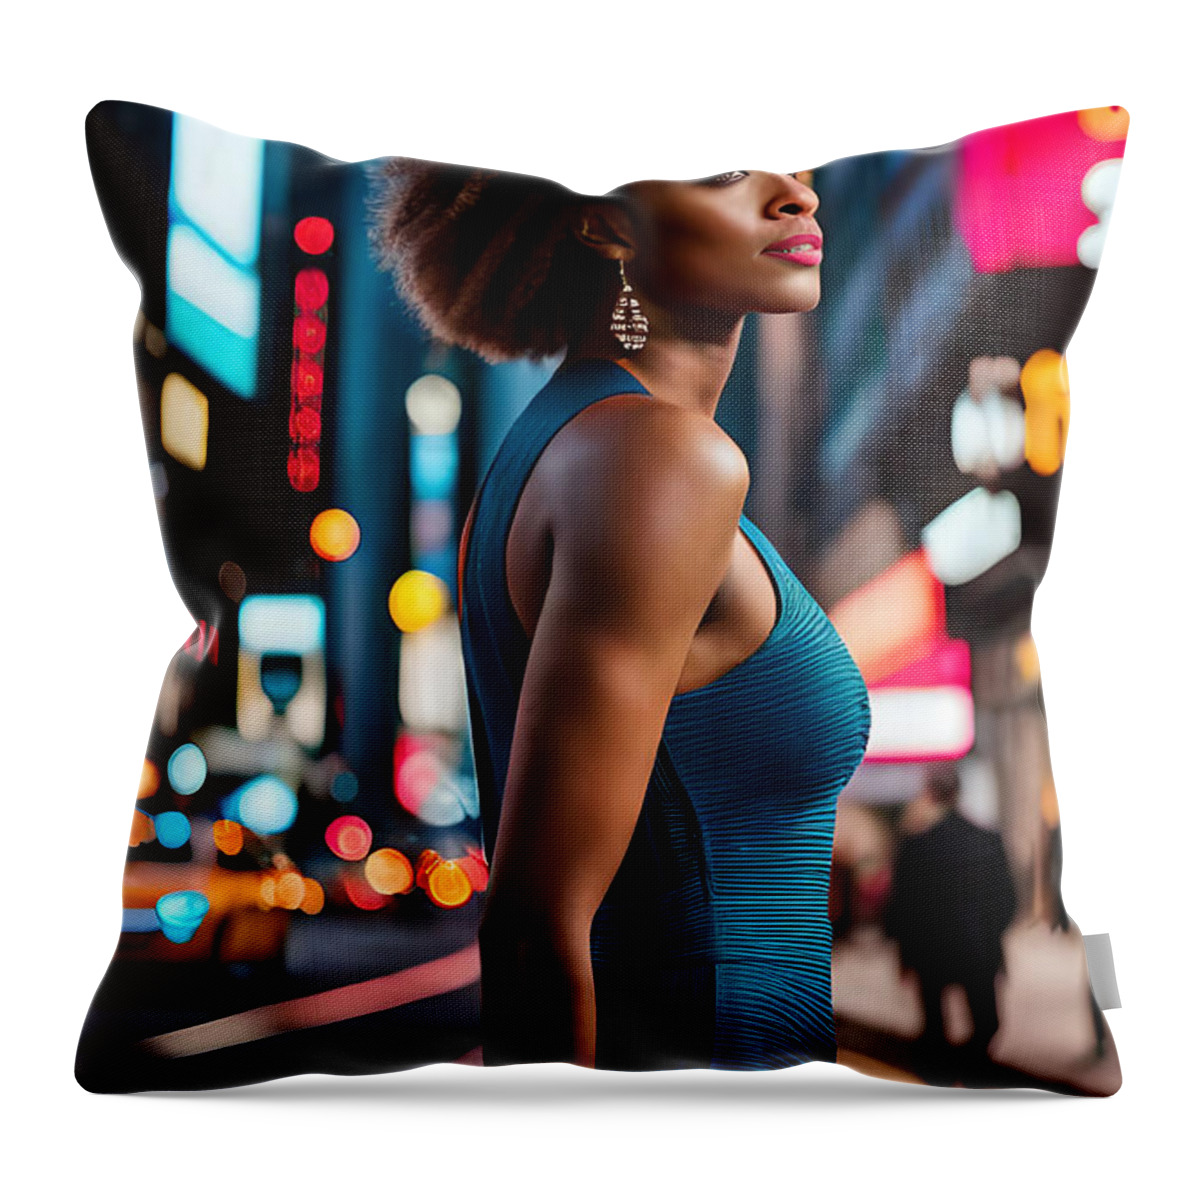 Woman In Ny Throw Pillow featuring the digital art Fifth Avenue by Gabriel Cusmir